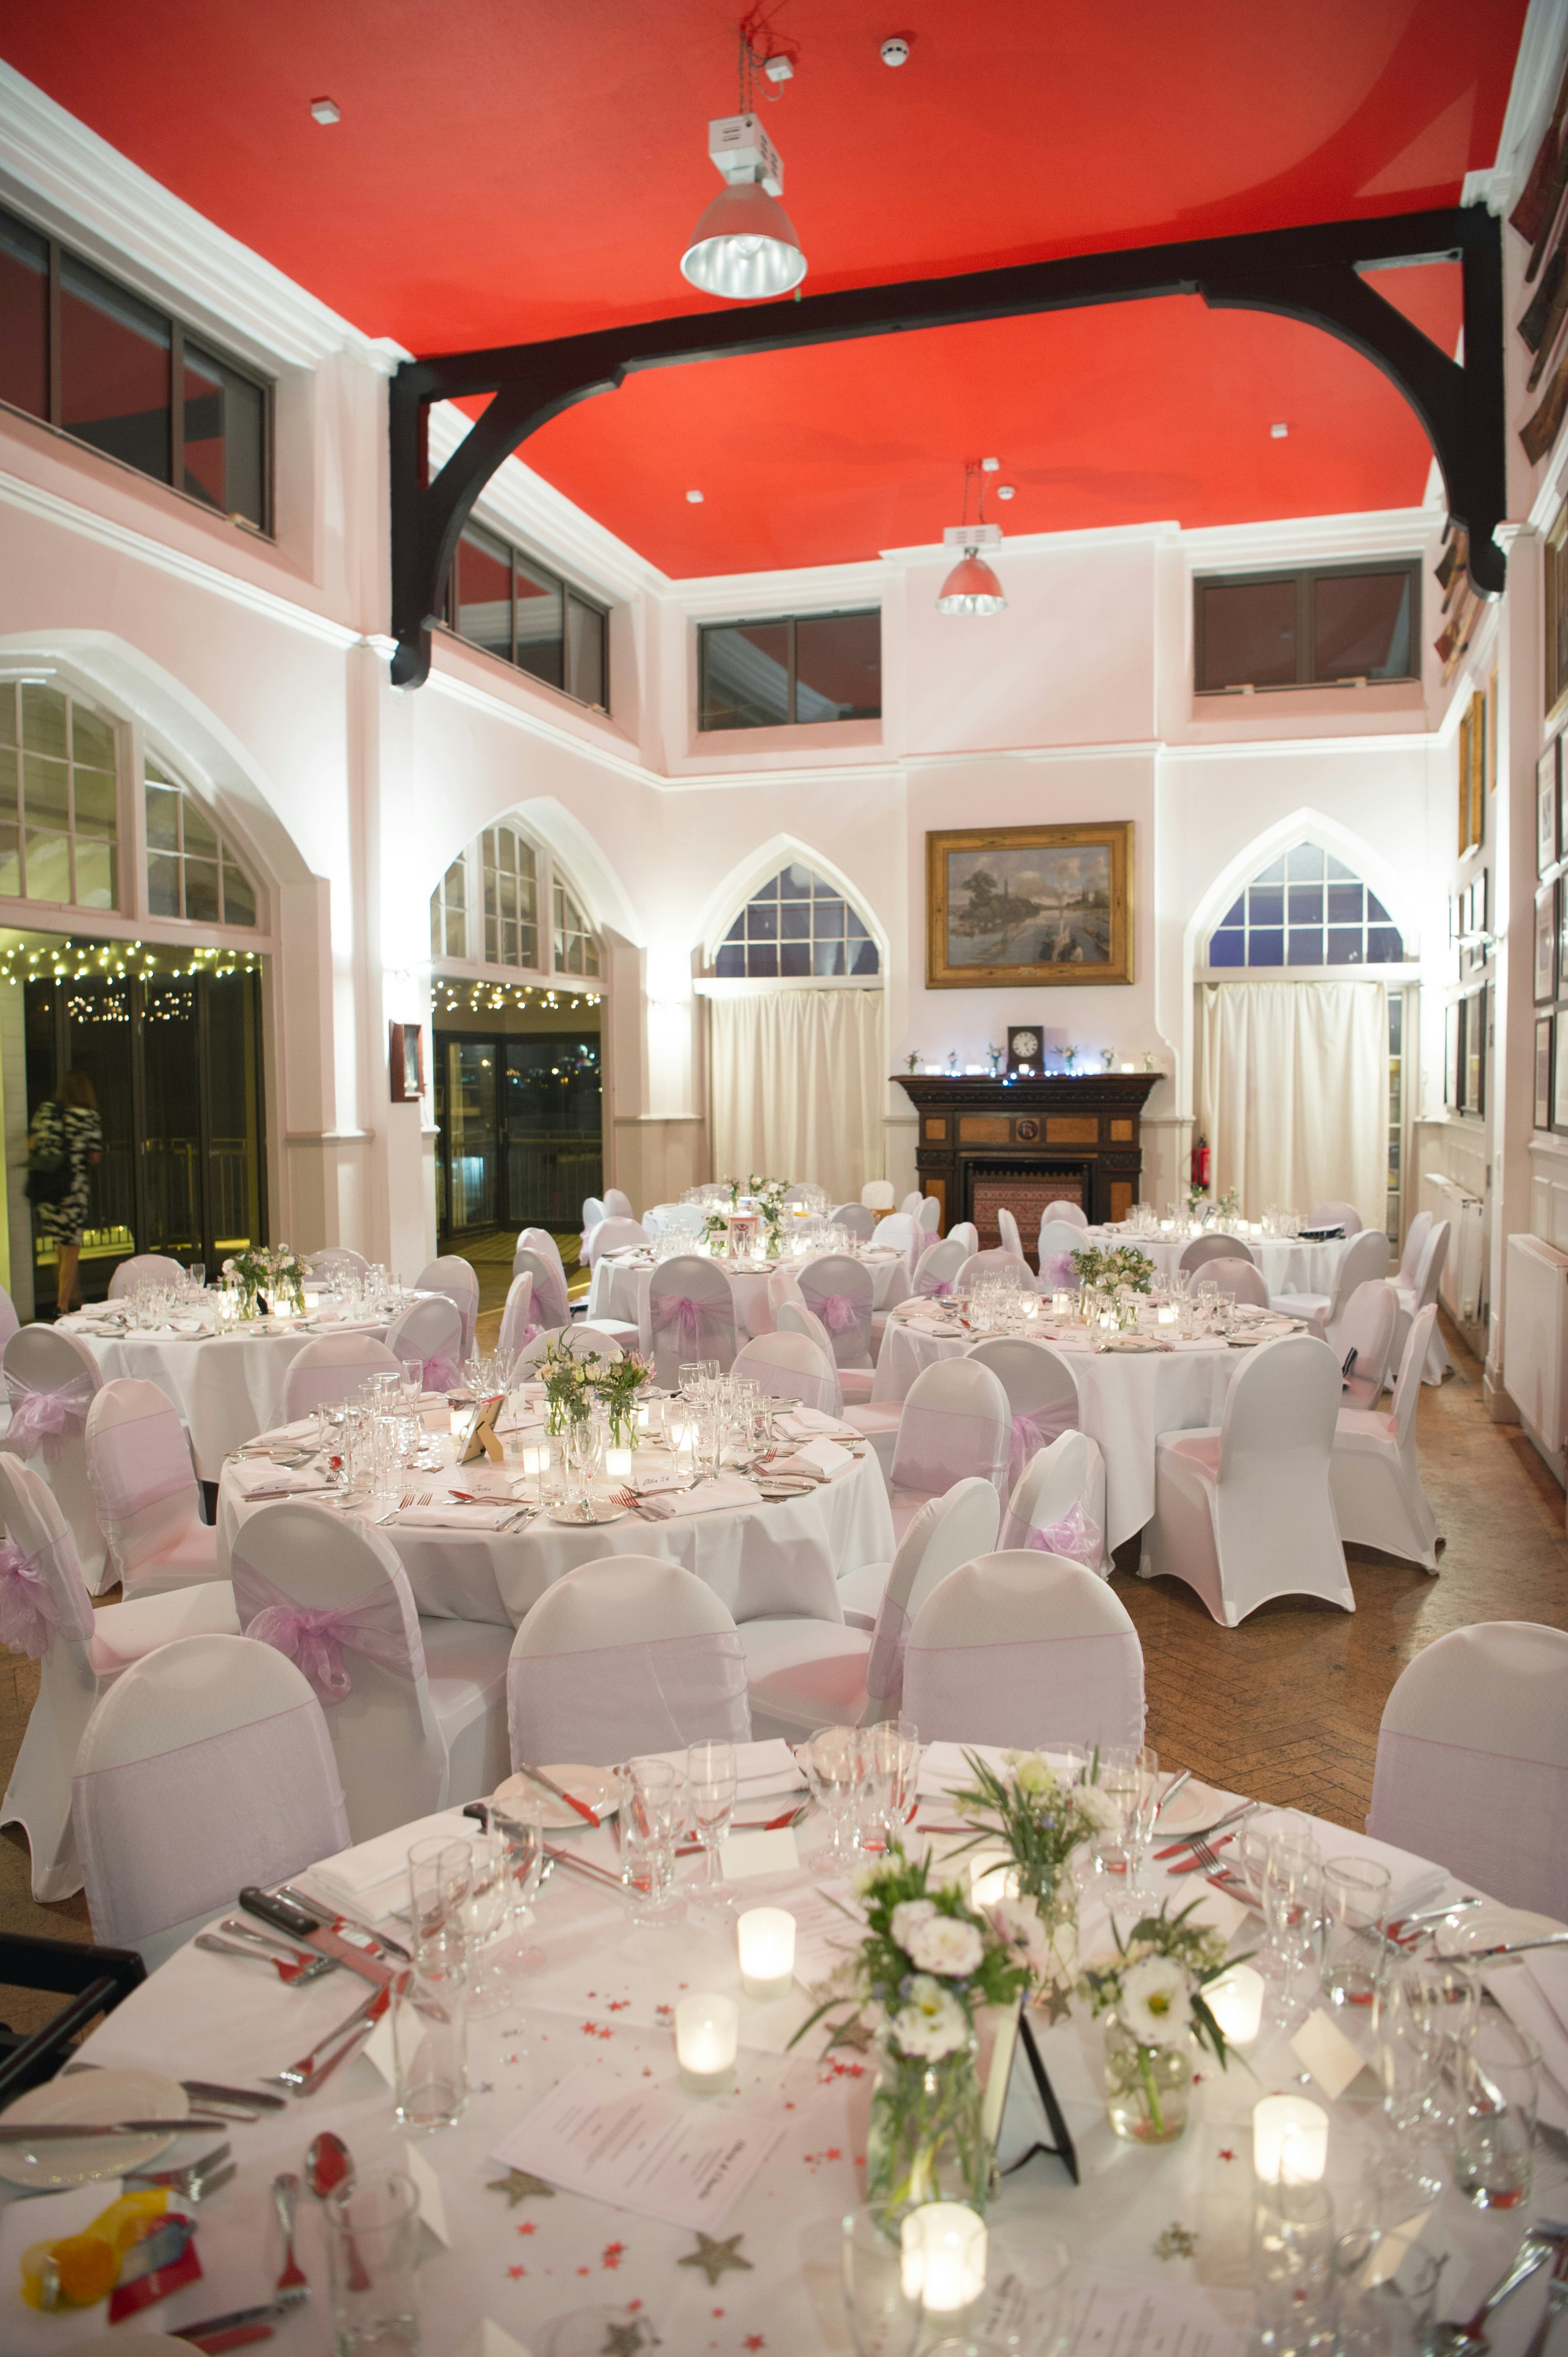 Thames Rowing Club - The Great Hall image 6